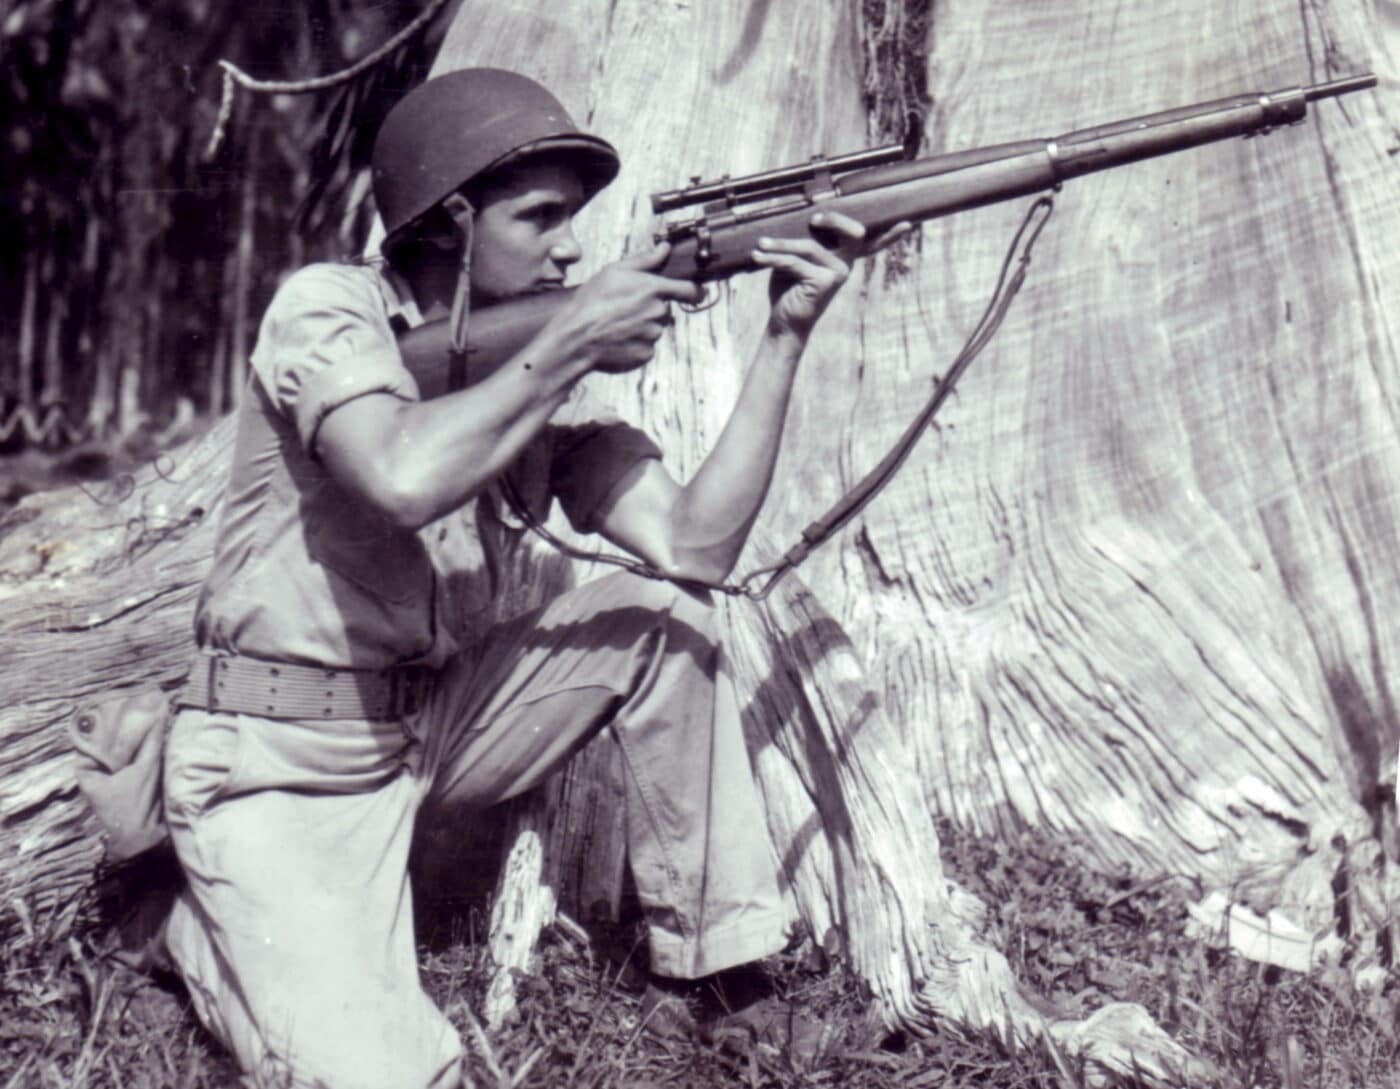 US Marine firing a Springfield 1903A4 sniper rifle during training exercises on Russell Island in 1945